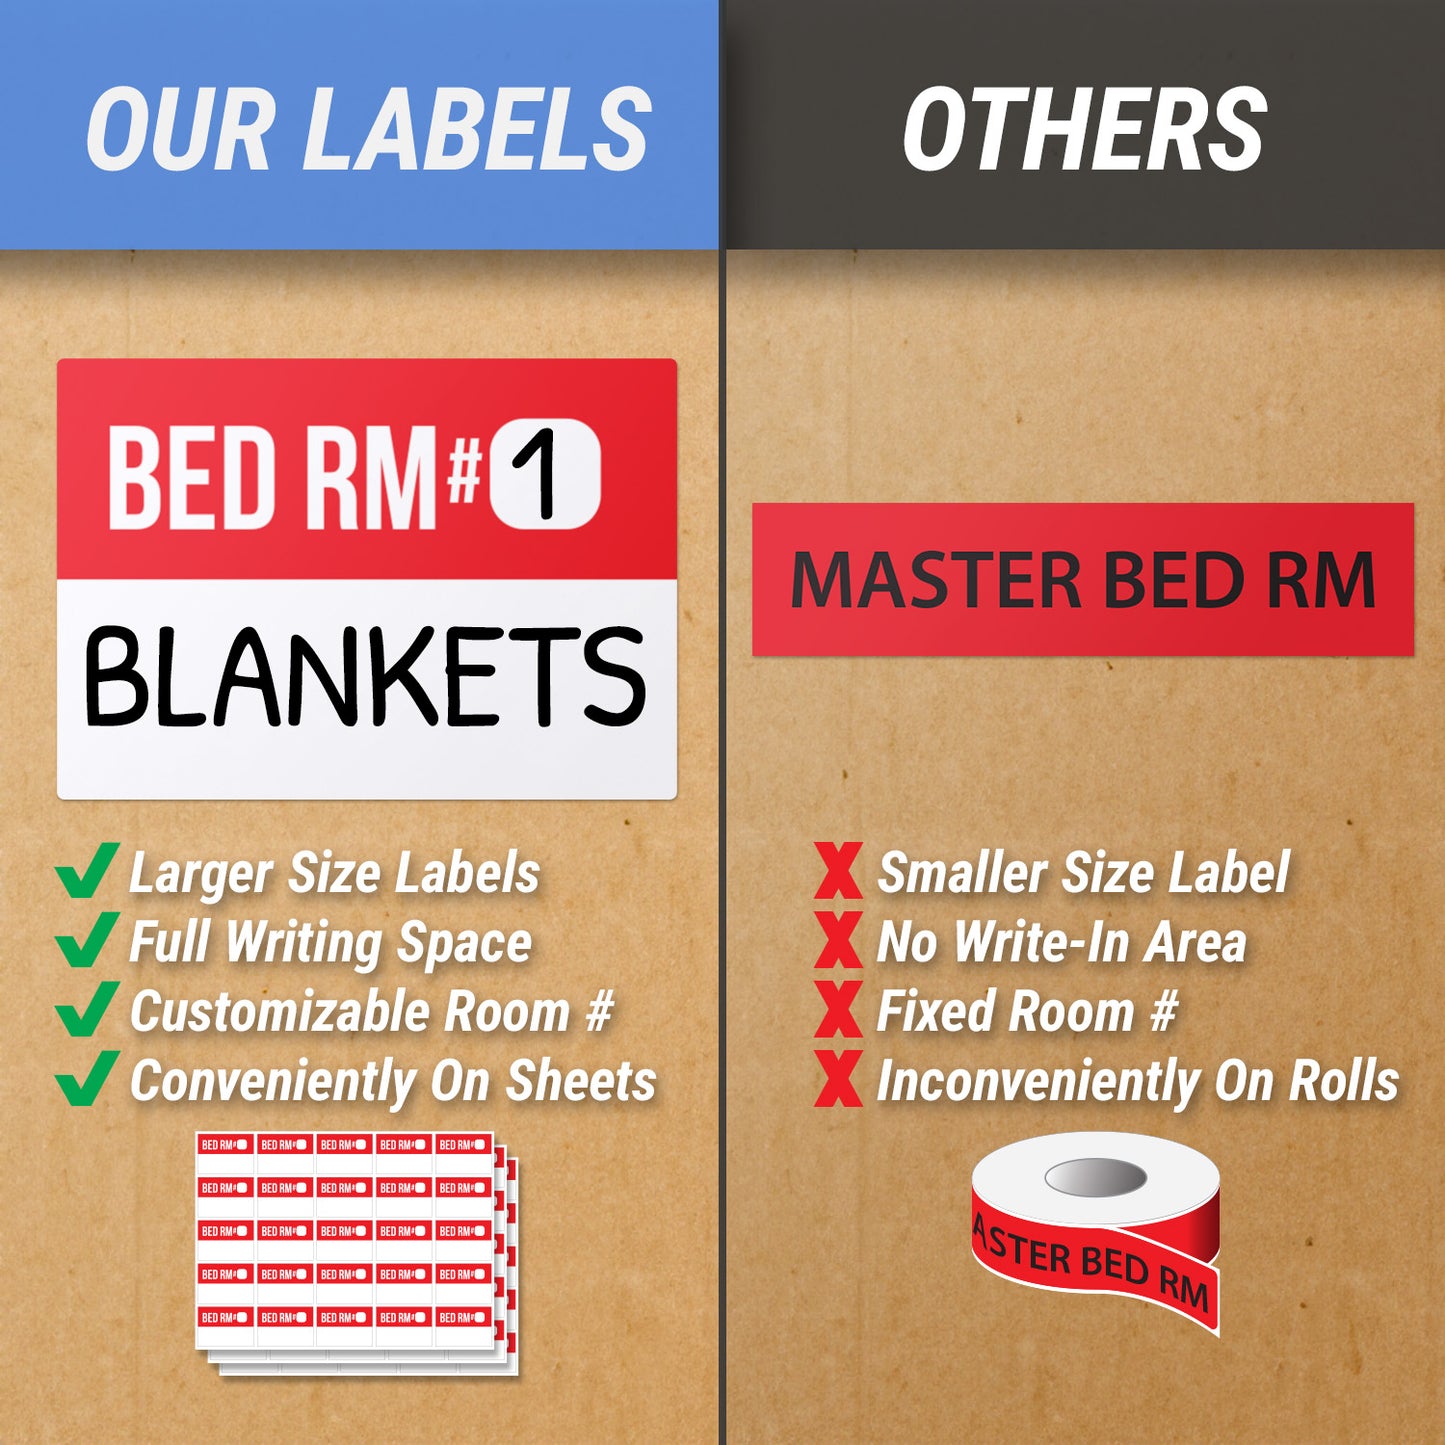 3 x 2 inch | Moving & Packing: Moving Labels for 2 - 3 Bedrooms (12 Designs)